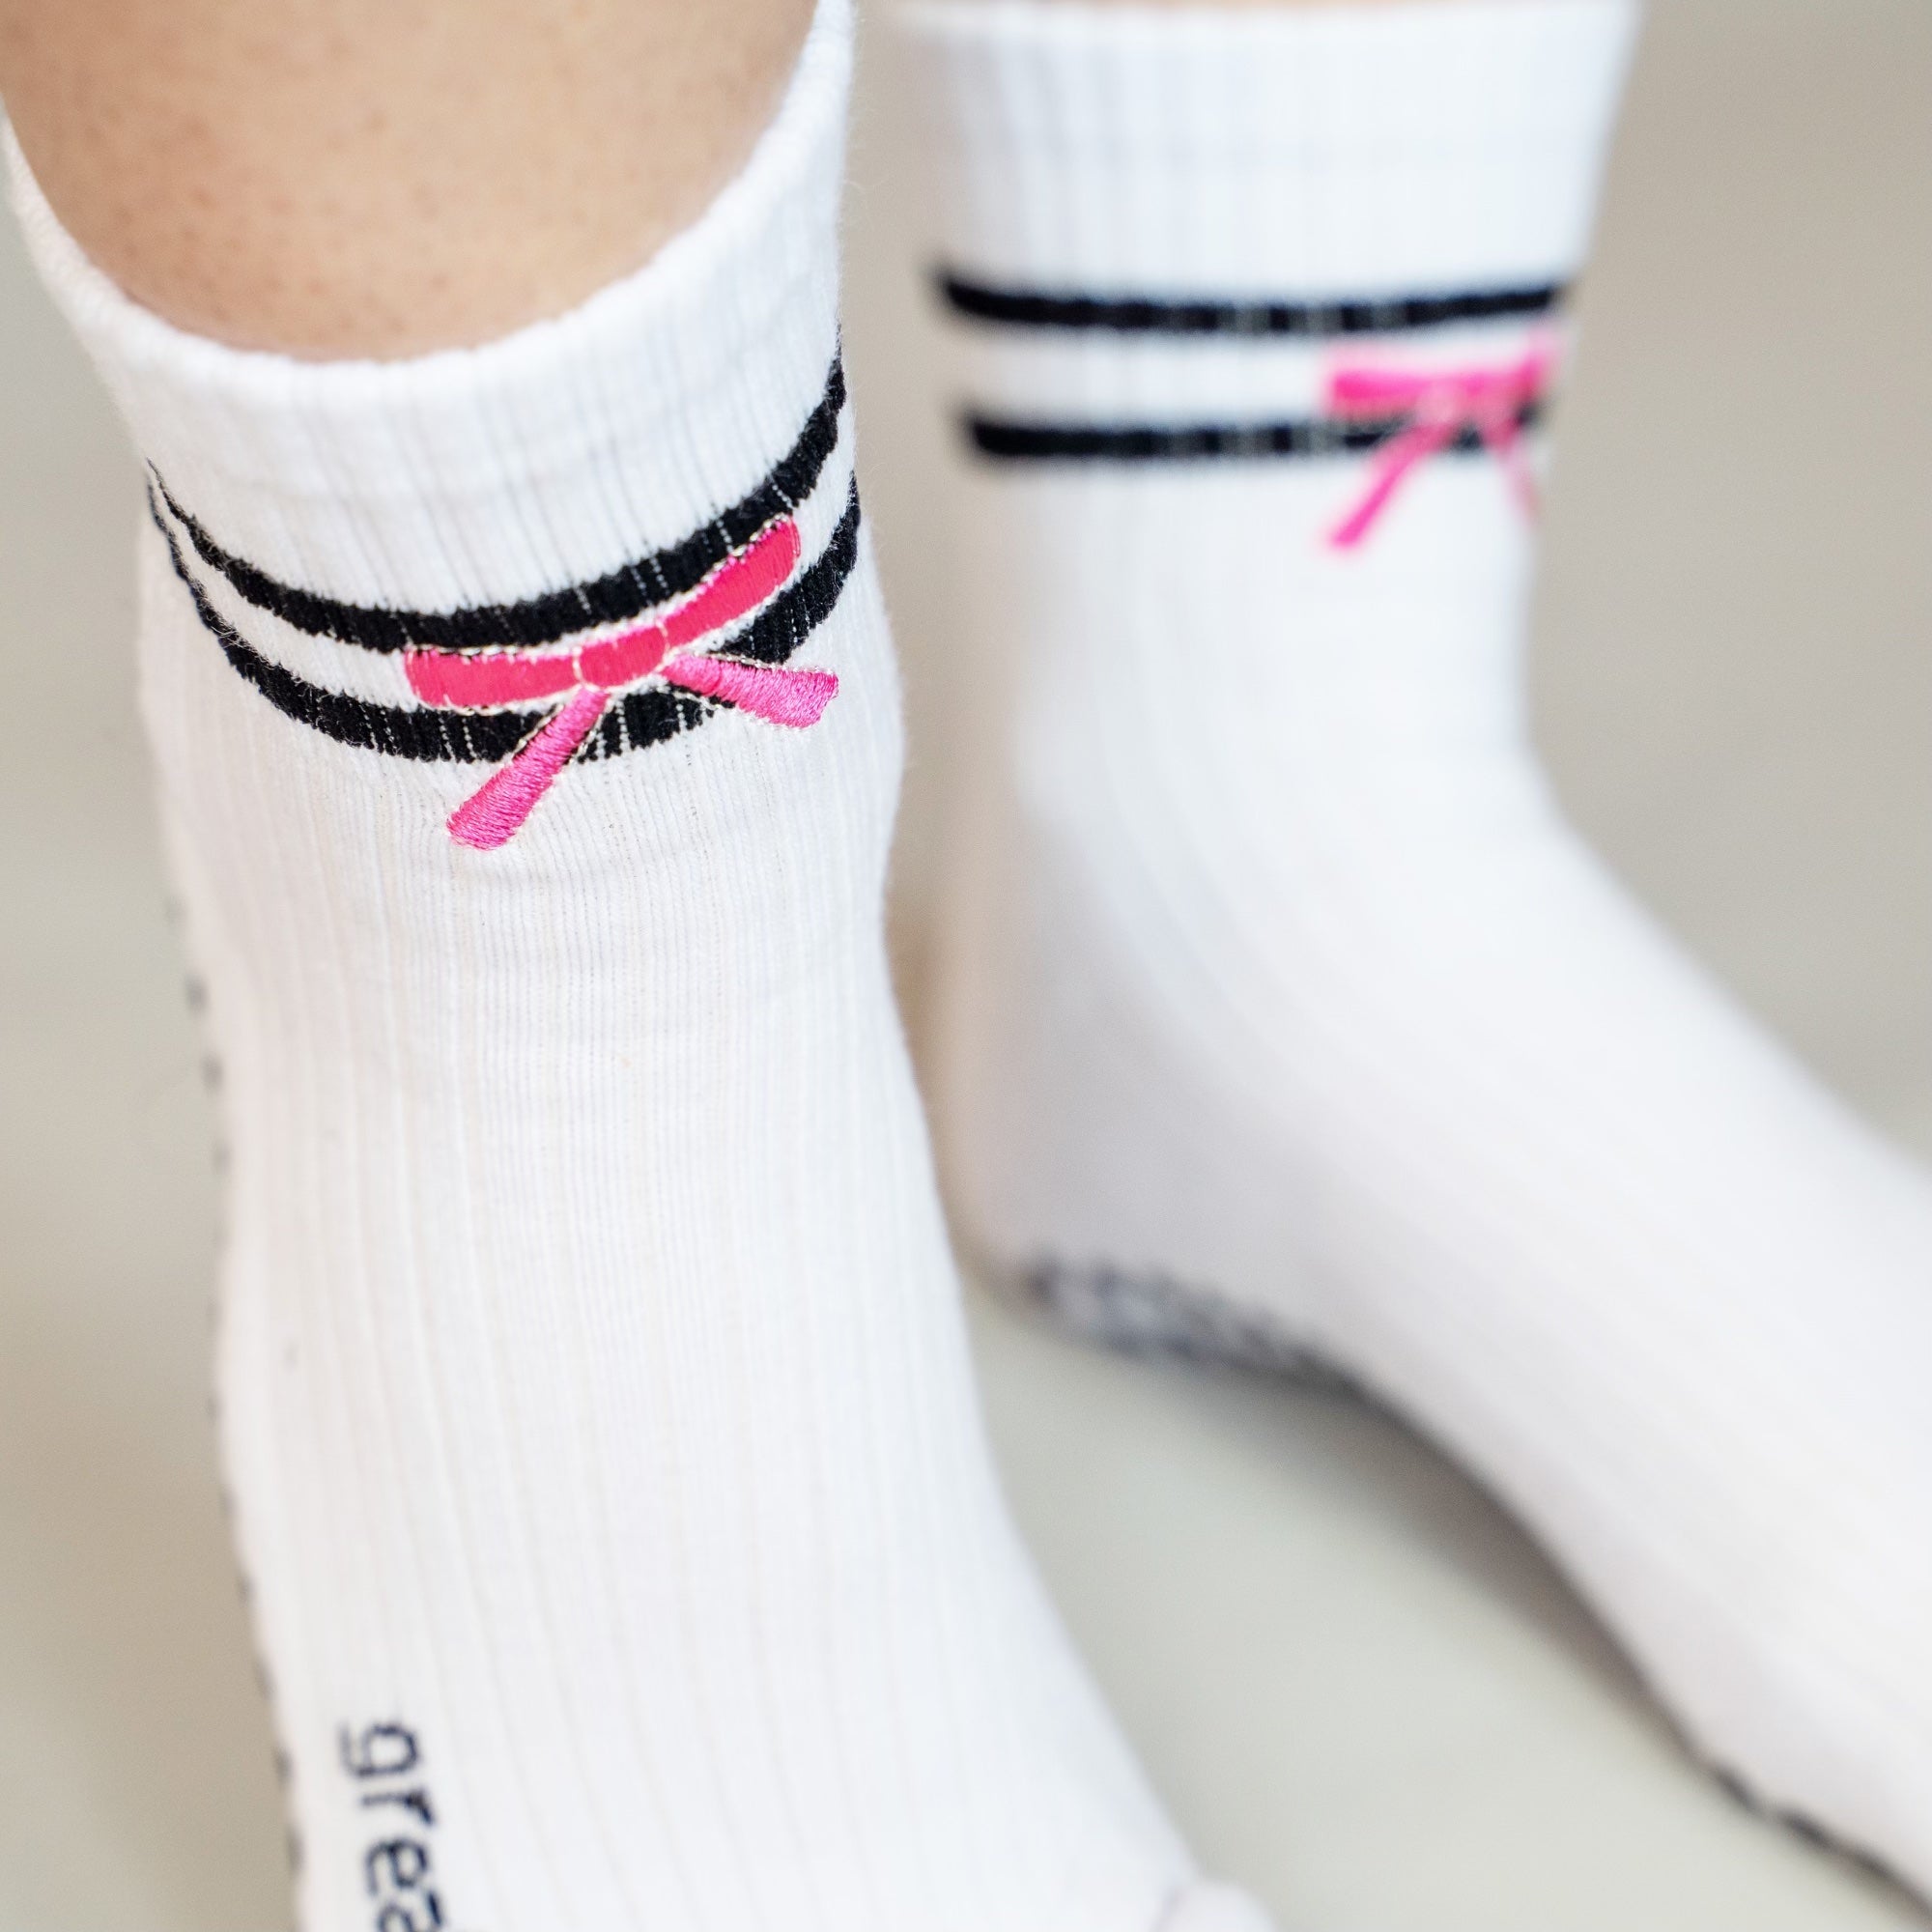 Greer crew grip sock in white, black, pink with a ribbon for pilates,barre and stretching